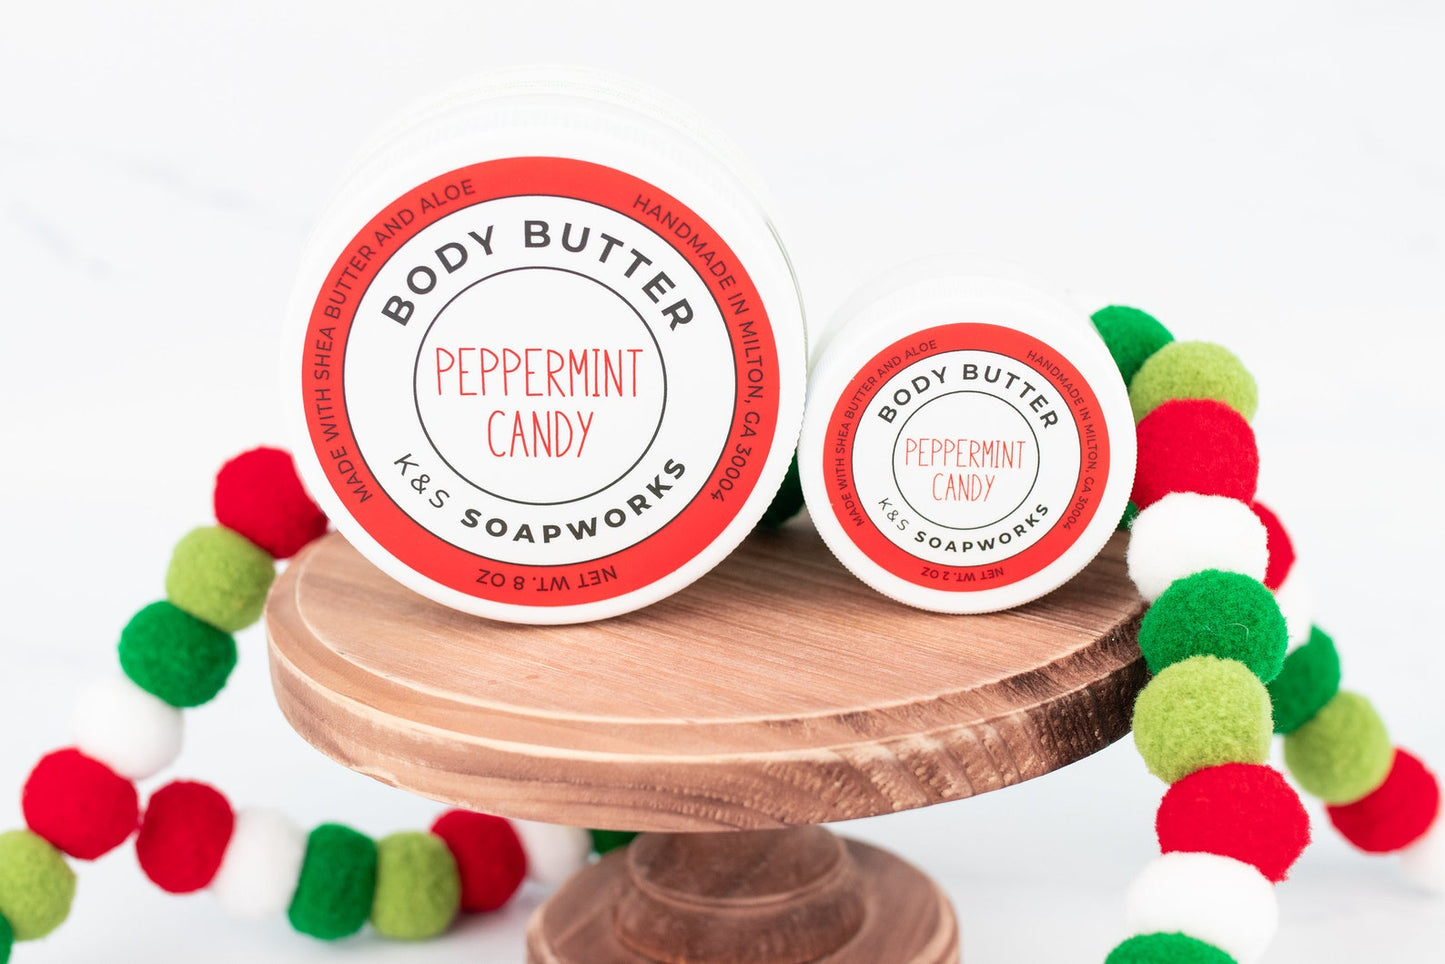 Holiday Body Butters